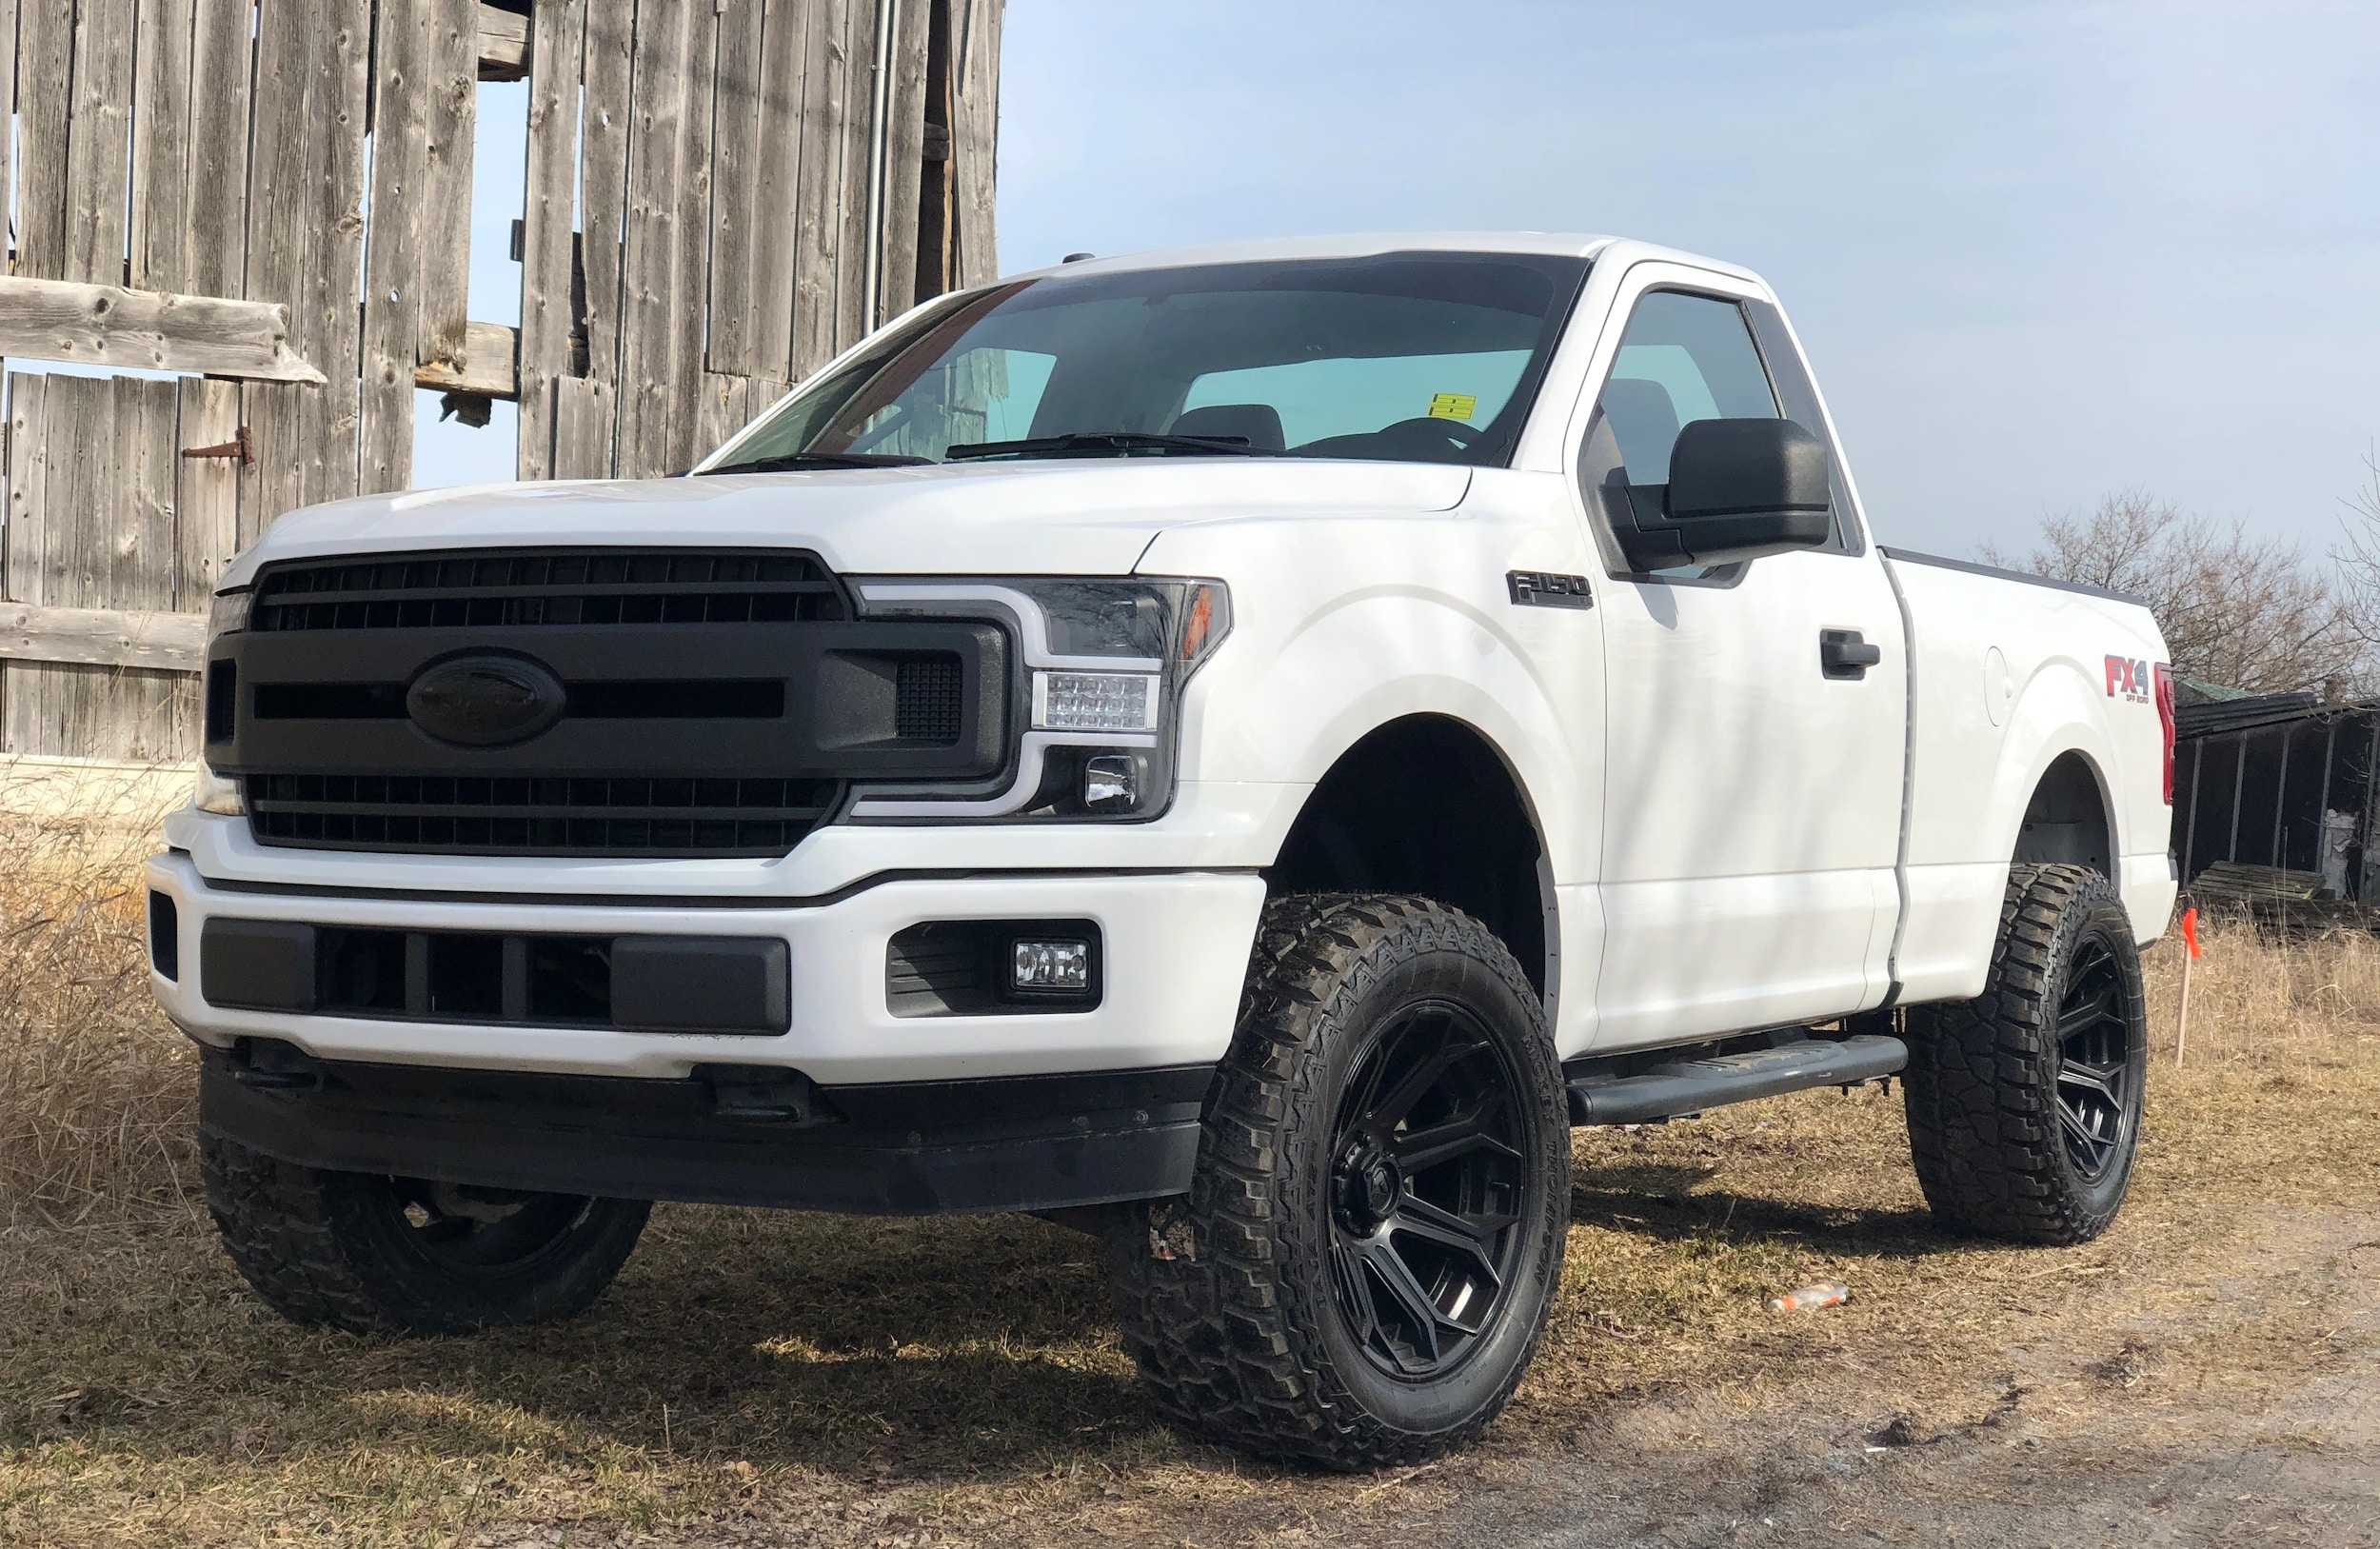 What Are The Advantages Of A Lifted Truck? | Performance Sales & Accessories